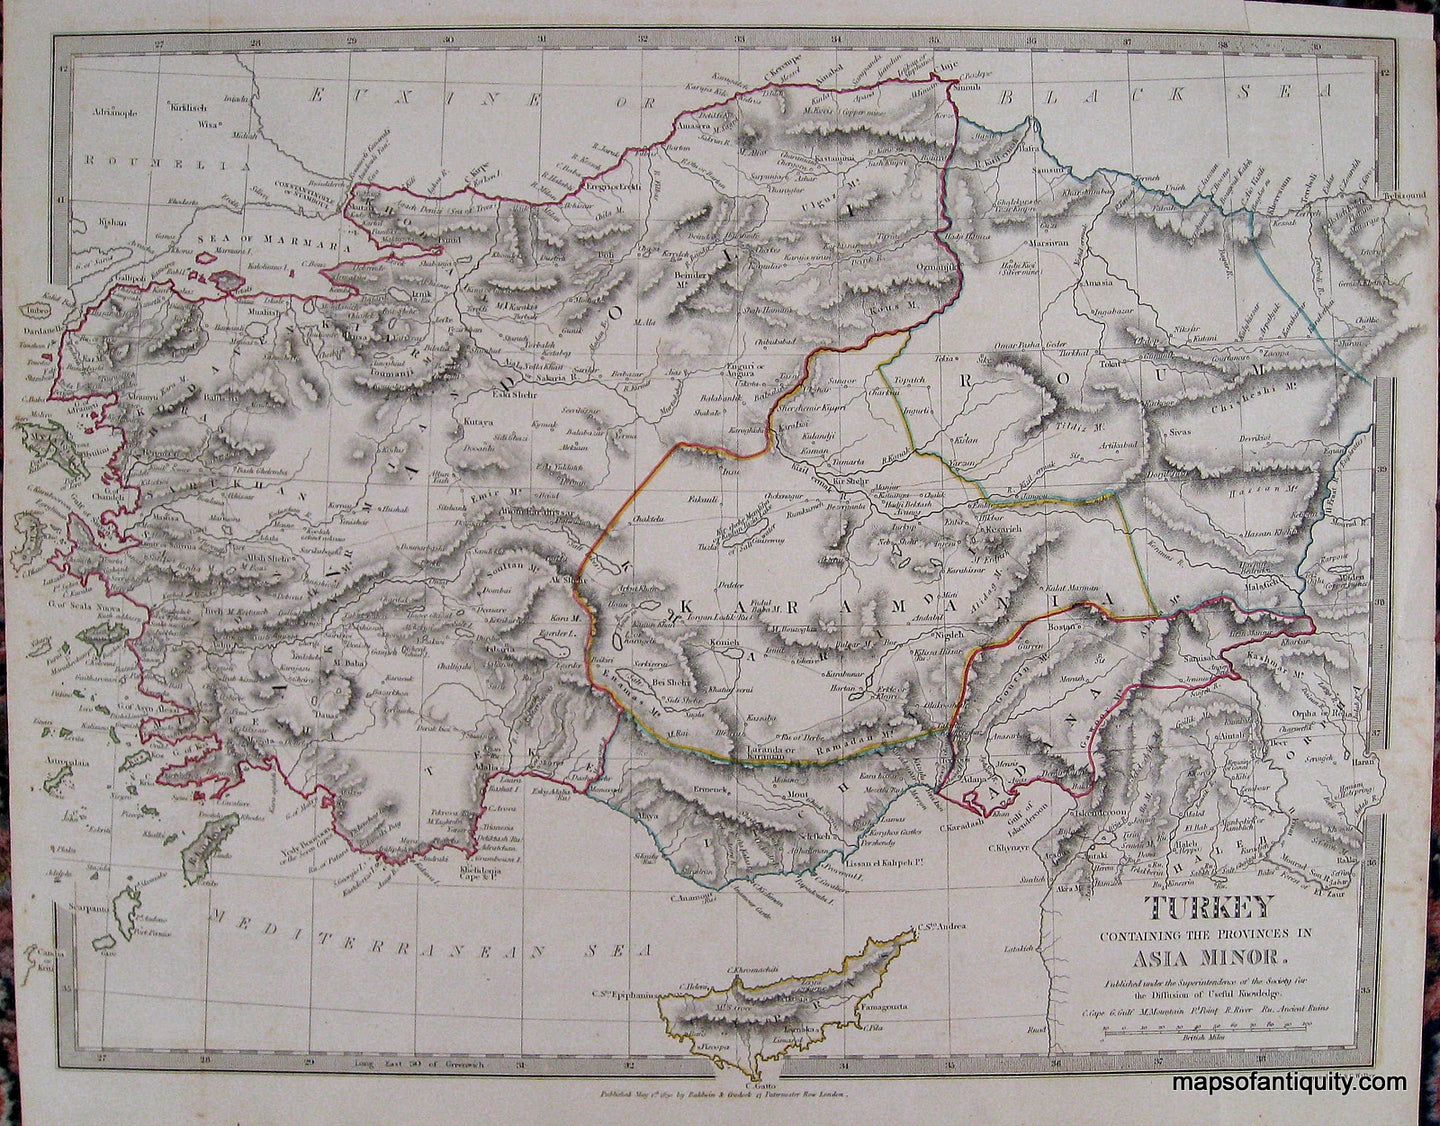 Black-and-White-Antique-Map-with-Outline-Color-Turkey-Containing-the-Provinces-in-Asia-Minor.-Turkey-in-Asia--1830-SDUK/Society-for-the-Diffusion-of-Useful-Knowledge-Maps-Of-Antiquity